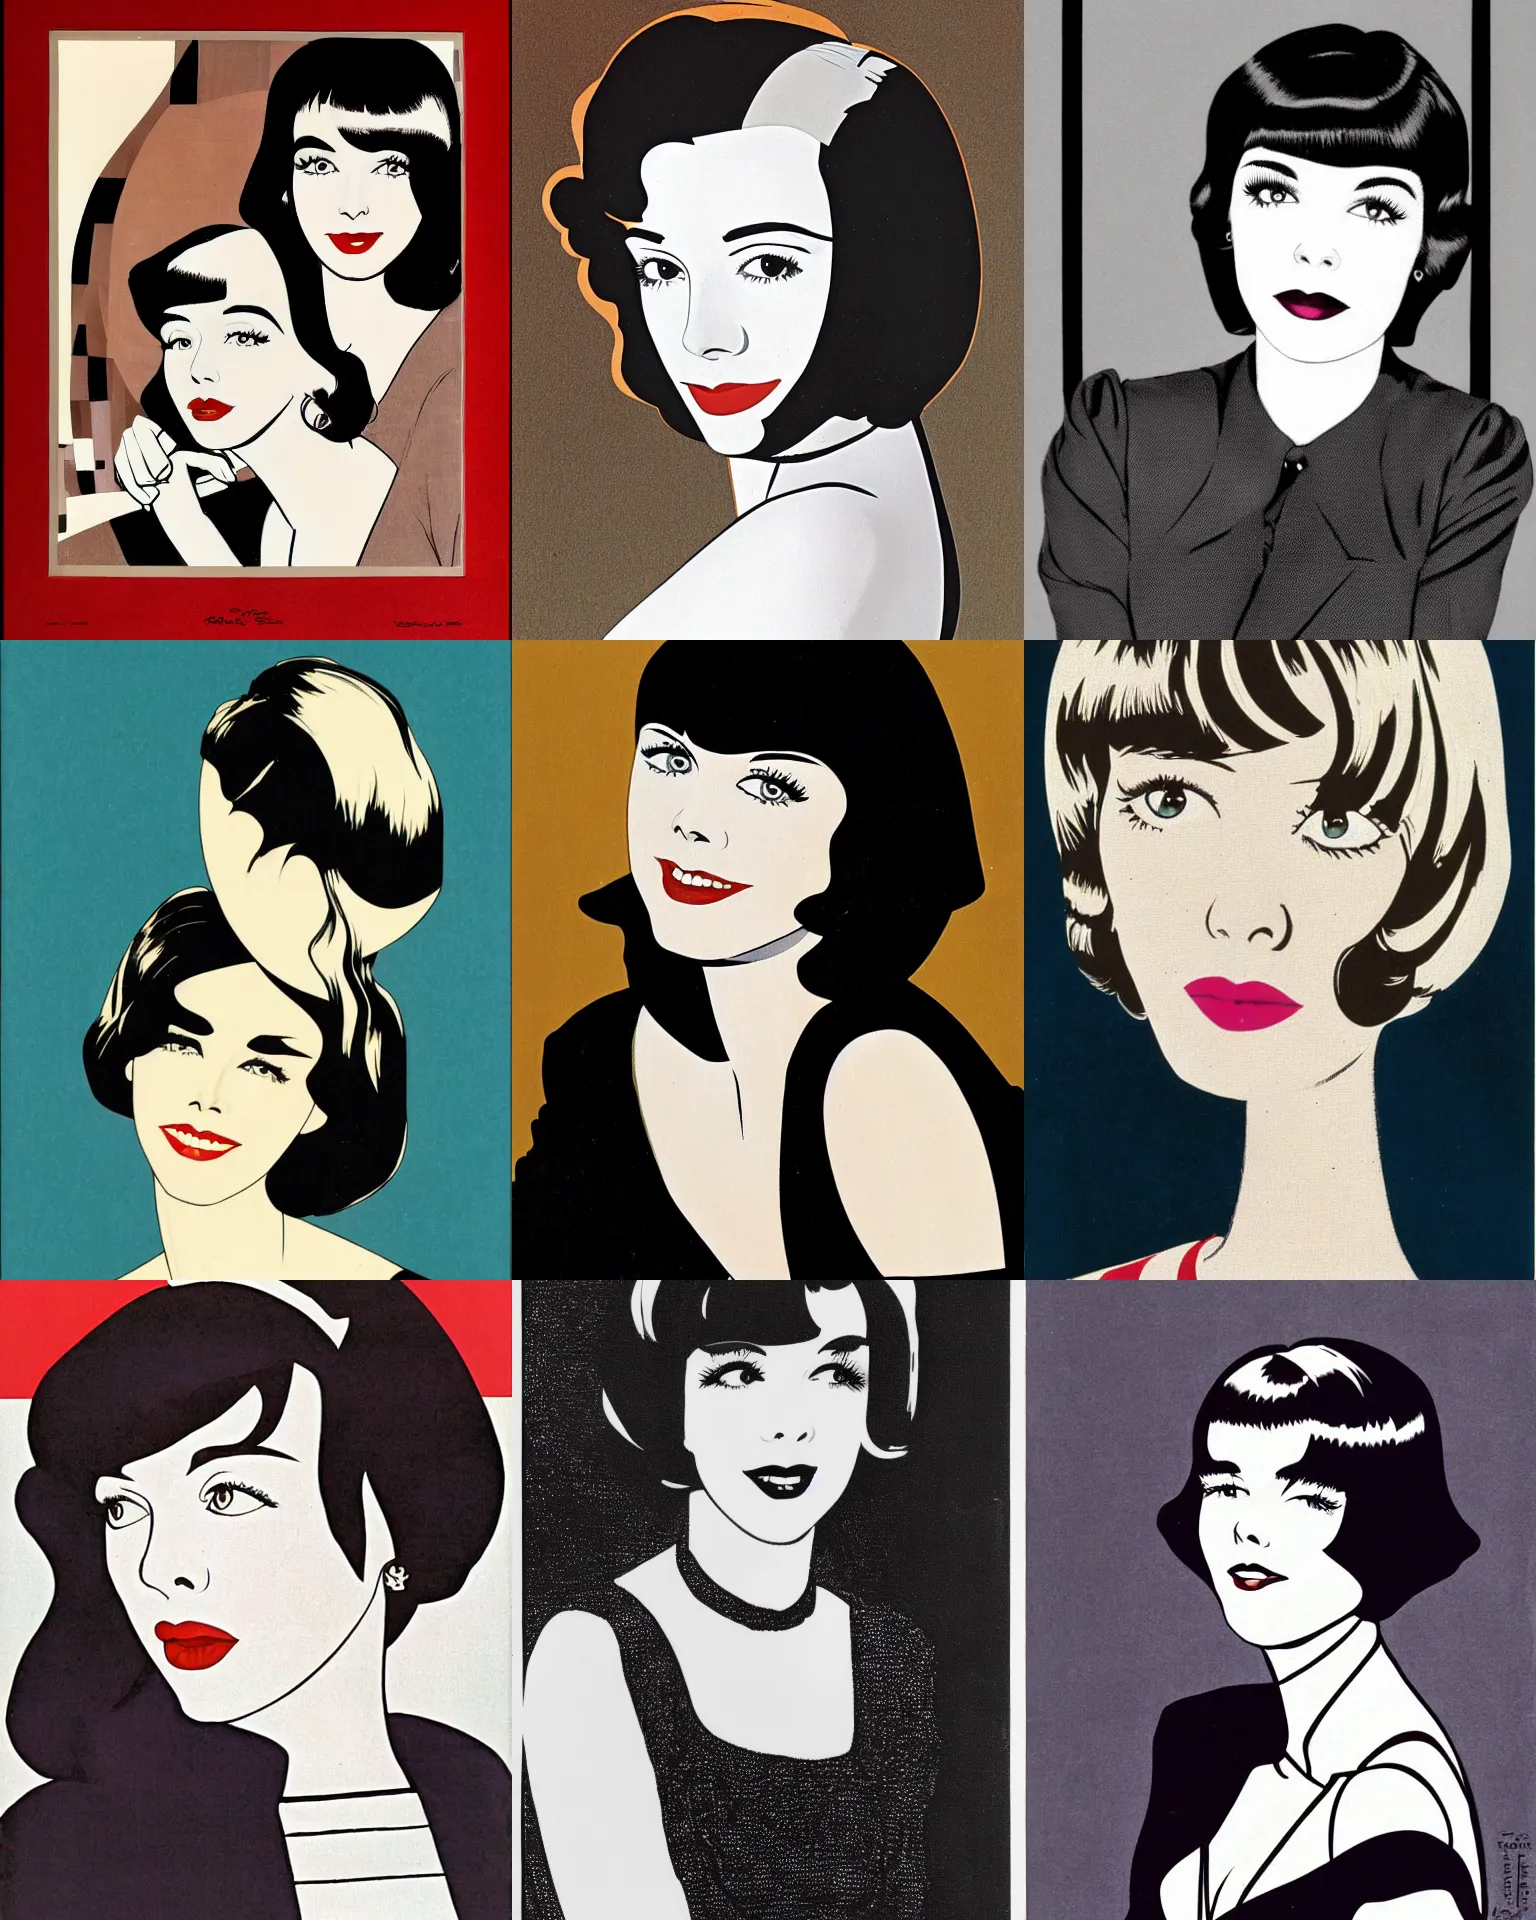 Prompt: Colleen Moore 25 years old, bob haircut, portrait by Patrick Nagel